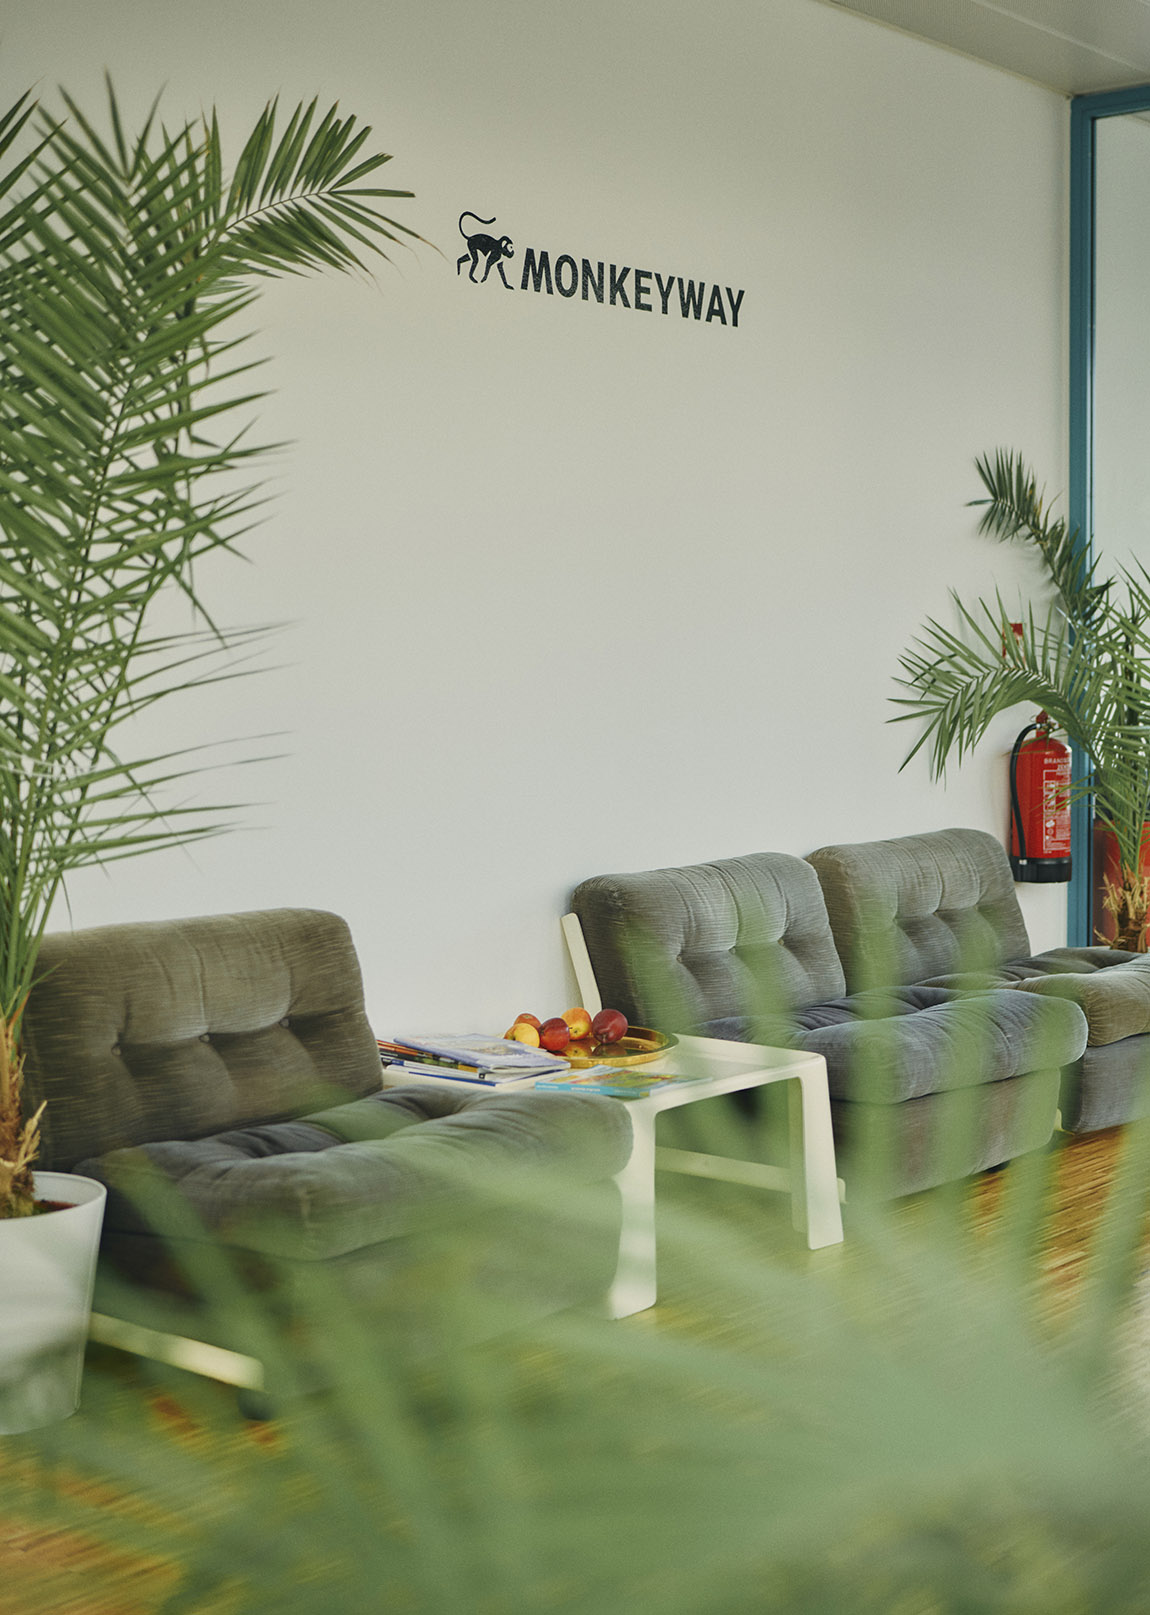 MONKEYWAY: Digital 3d solutions for superior customer experiences